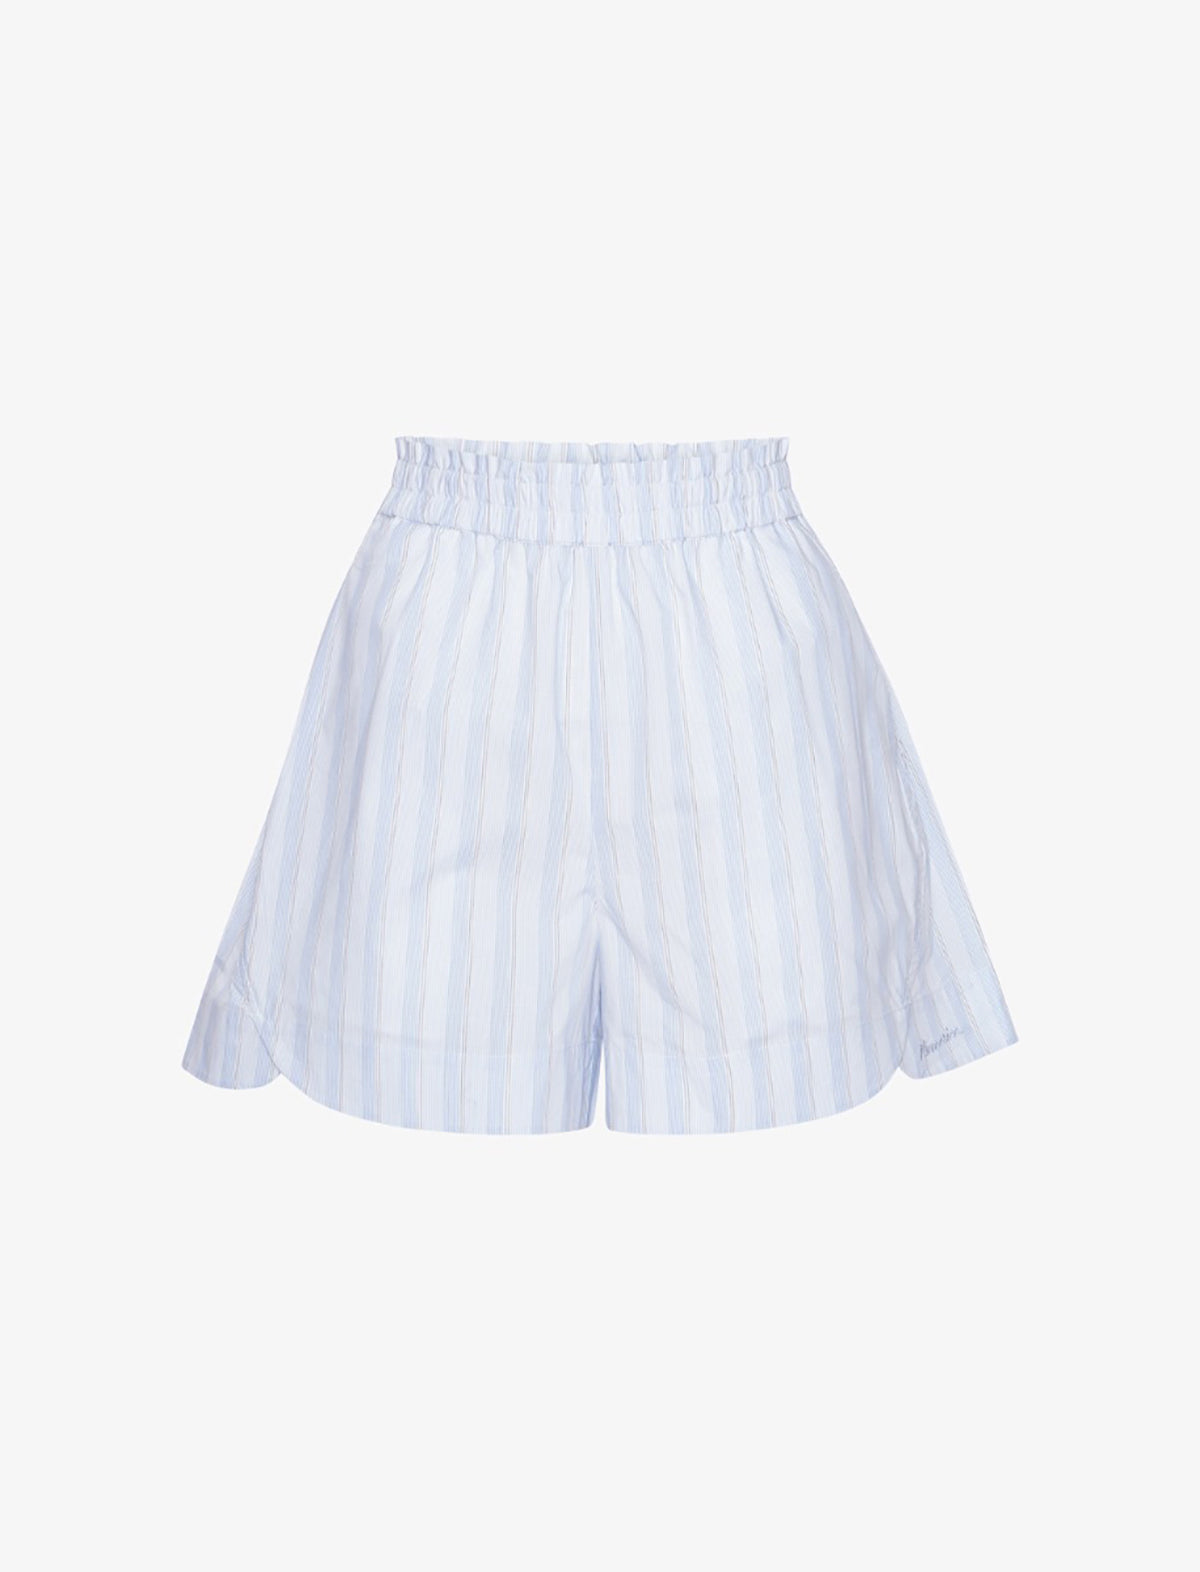 REMAIN Striped Wide Shorts in Grapemist Comb